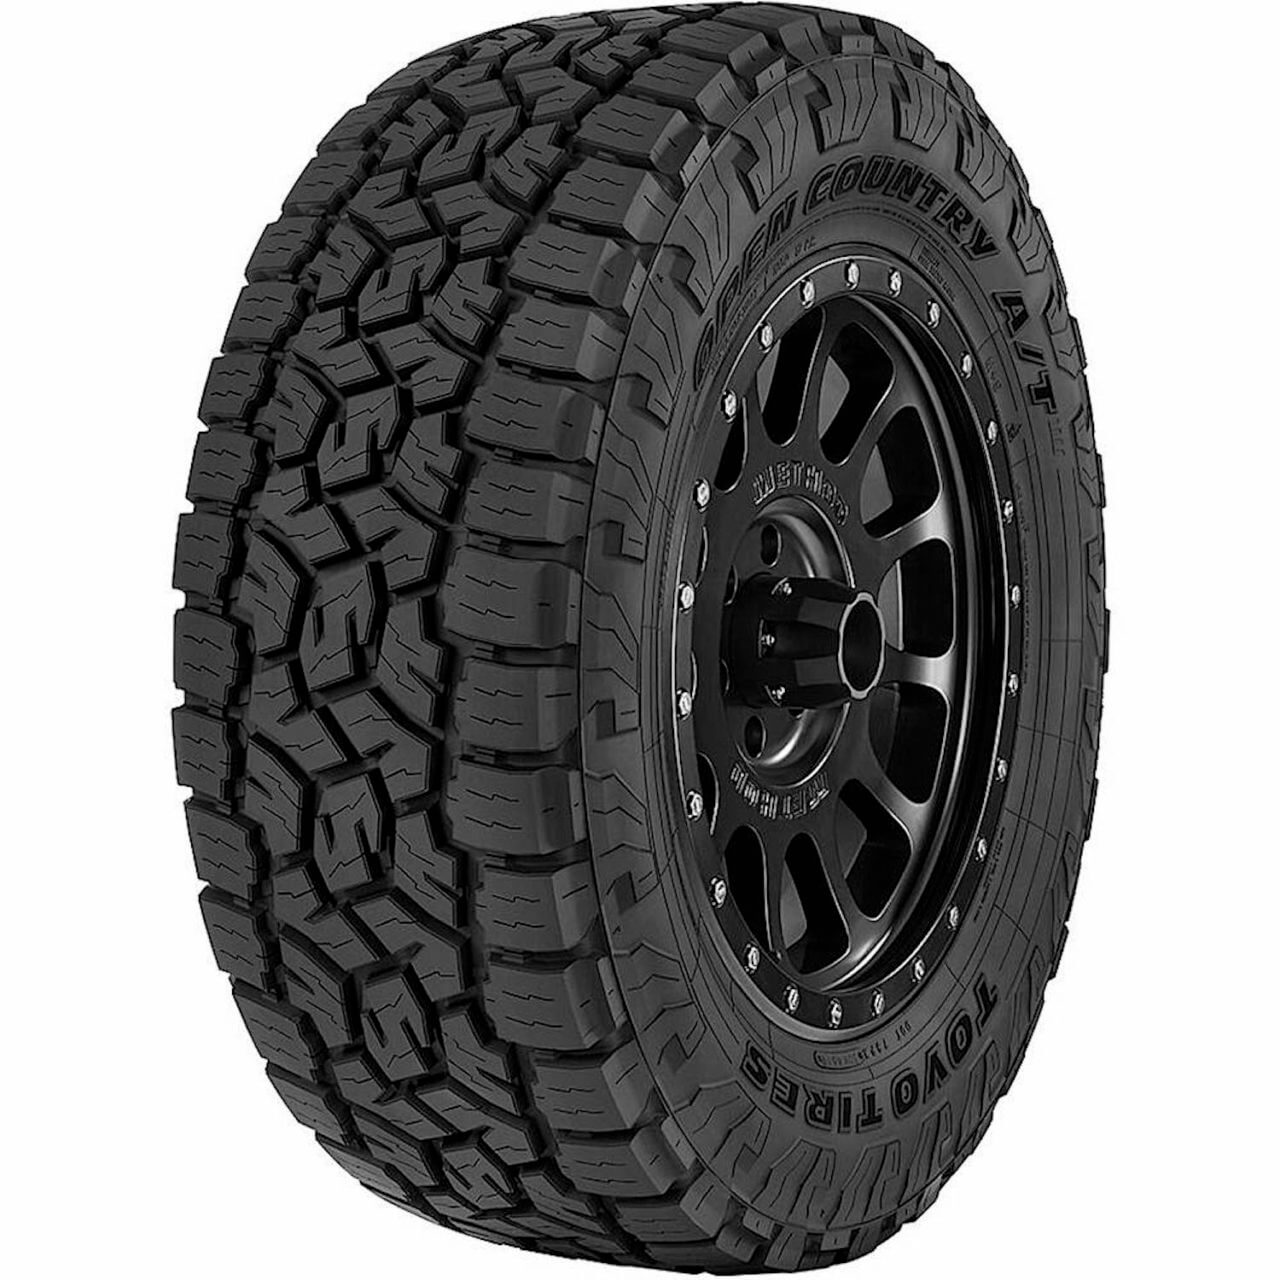 06 Toyo Open Country AT III All Terrain Tire